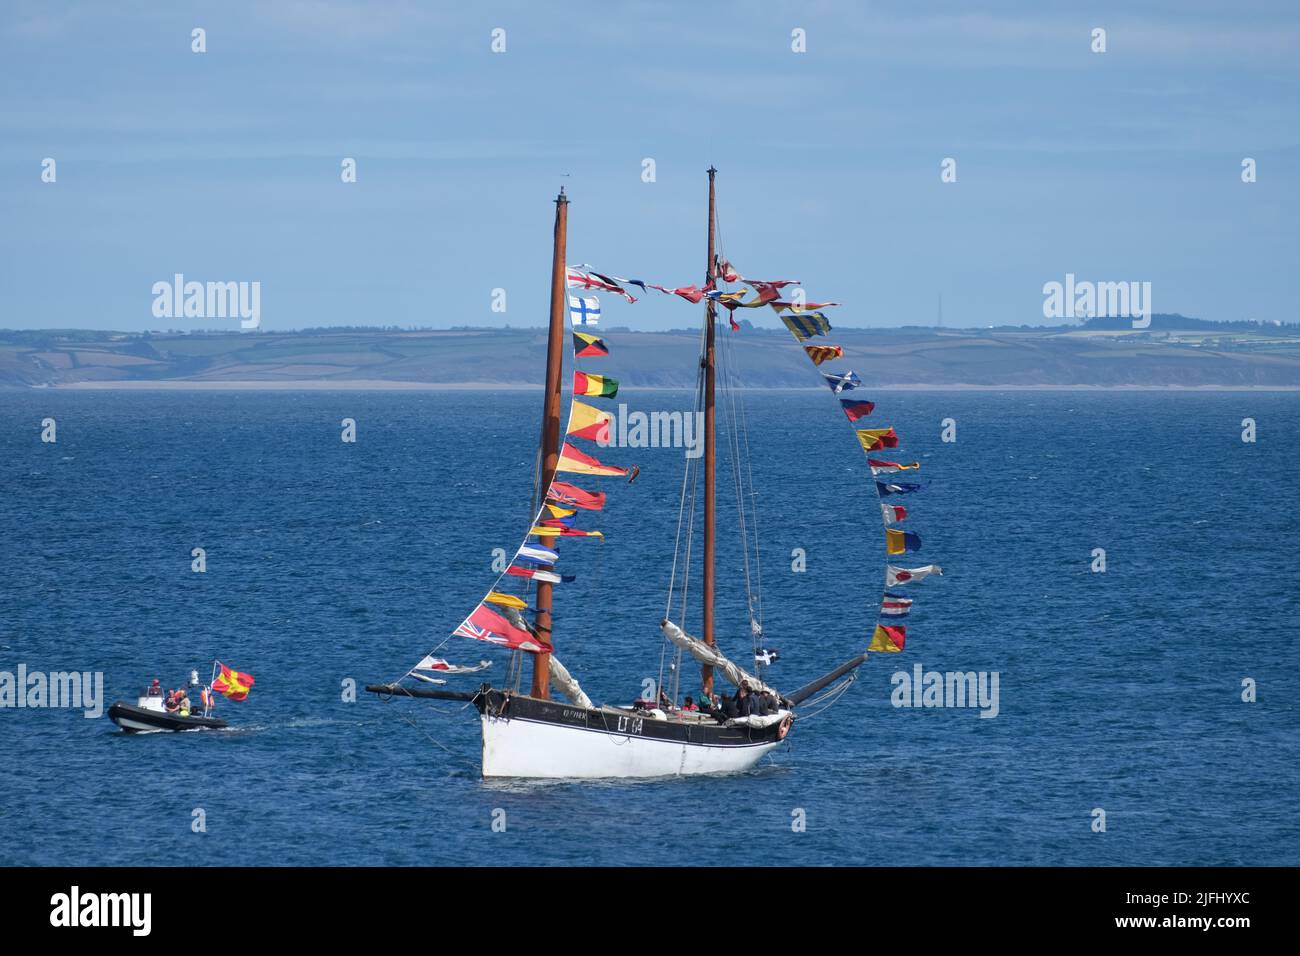 Mousehole, Cornwall, UK. 3rd july 2022. UK Weather. Sunshine and breezy, ideal weather for the final day of the Sea Salts and Sail maritime festival at Mousehole today. Credit Simon Maycock / Alamy Live News. Stock Photo